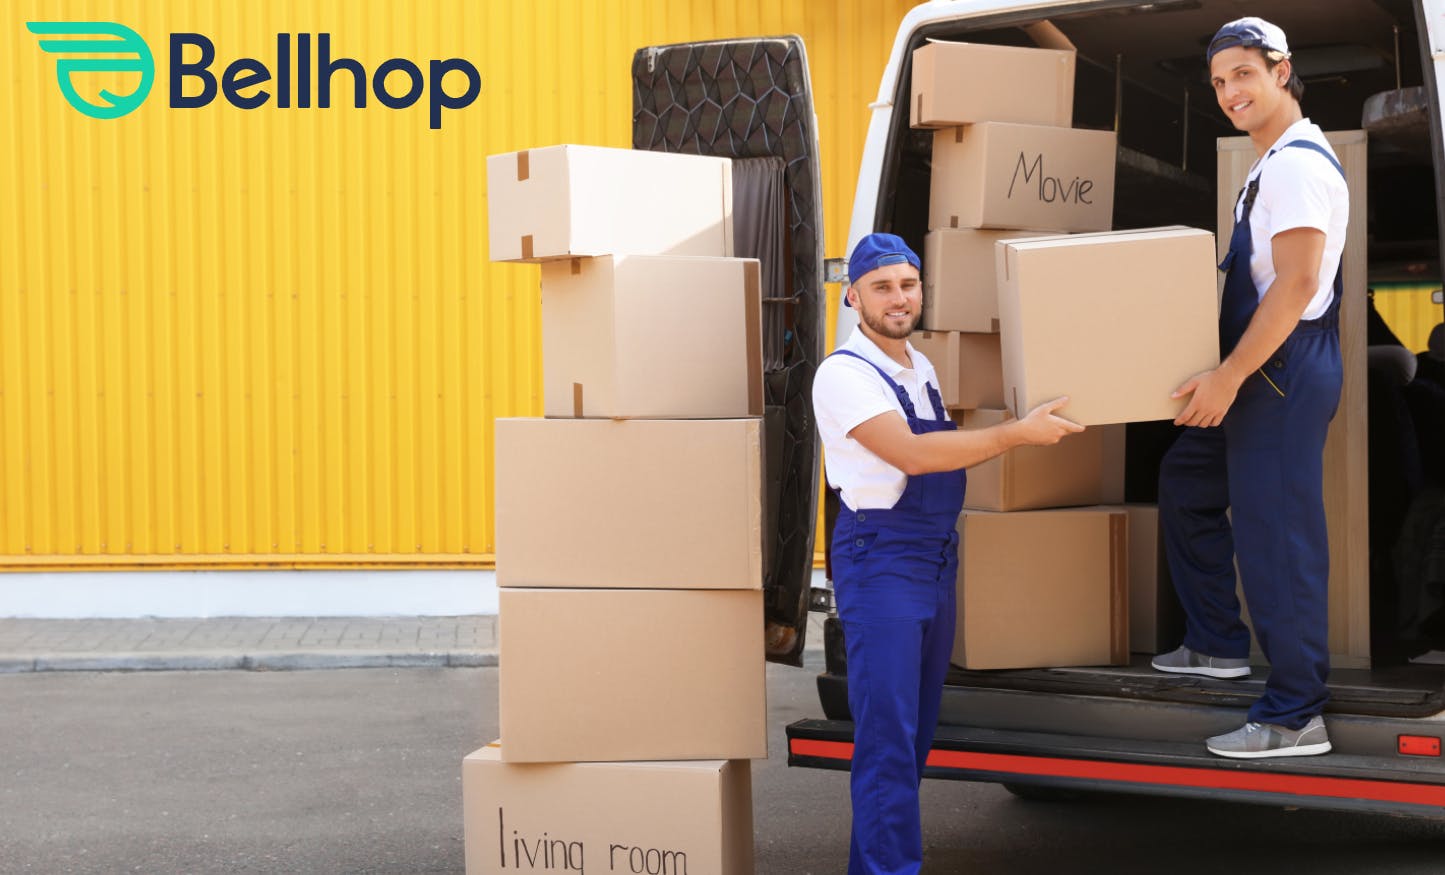 Bellhop Moving Services: Full Review